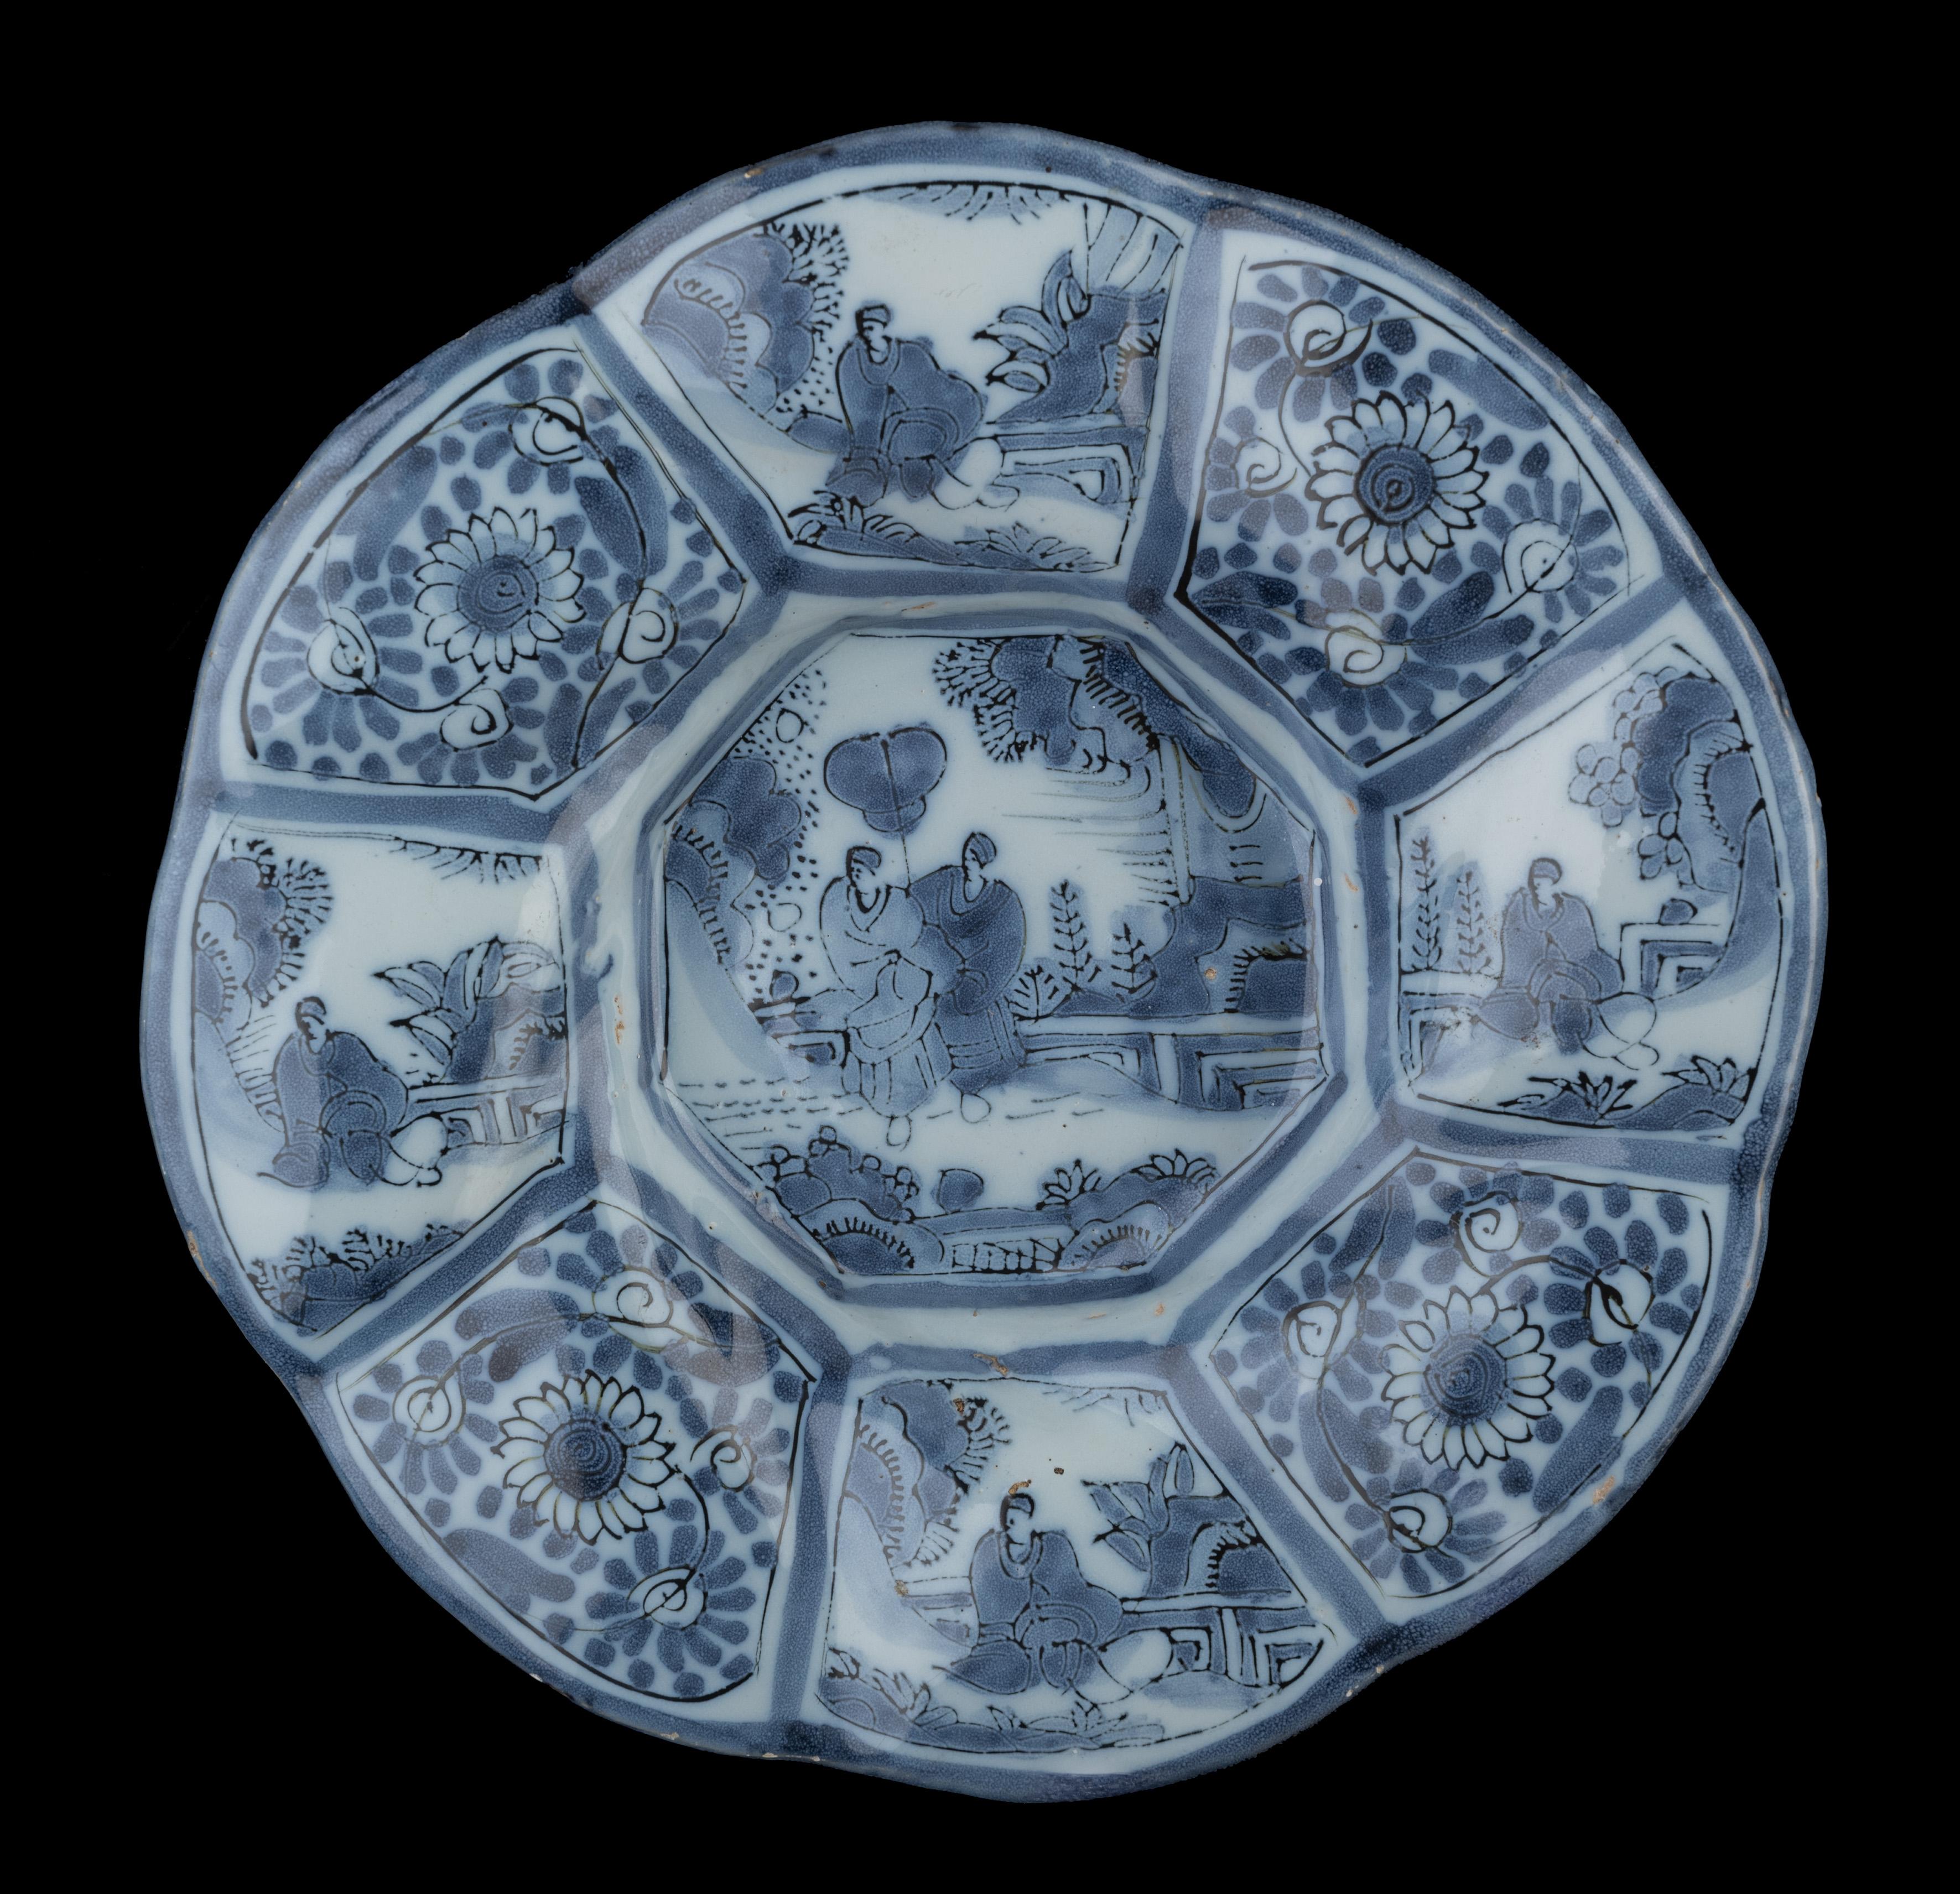 Pair of blue and white chinoiserie lobed dishes. Delft, 1680-1700
Dimensions: diameter 30 cm / 11.81 in each.

The lobed dishes are composed of eight wide and twisted lobes and are painted in blue with a chinoiserie decor. Two sitting Chinese